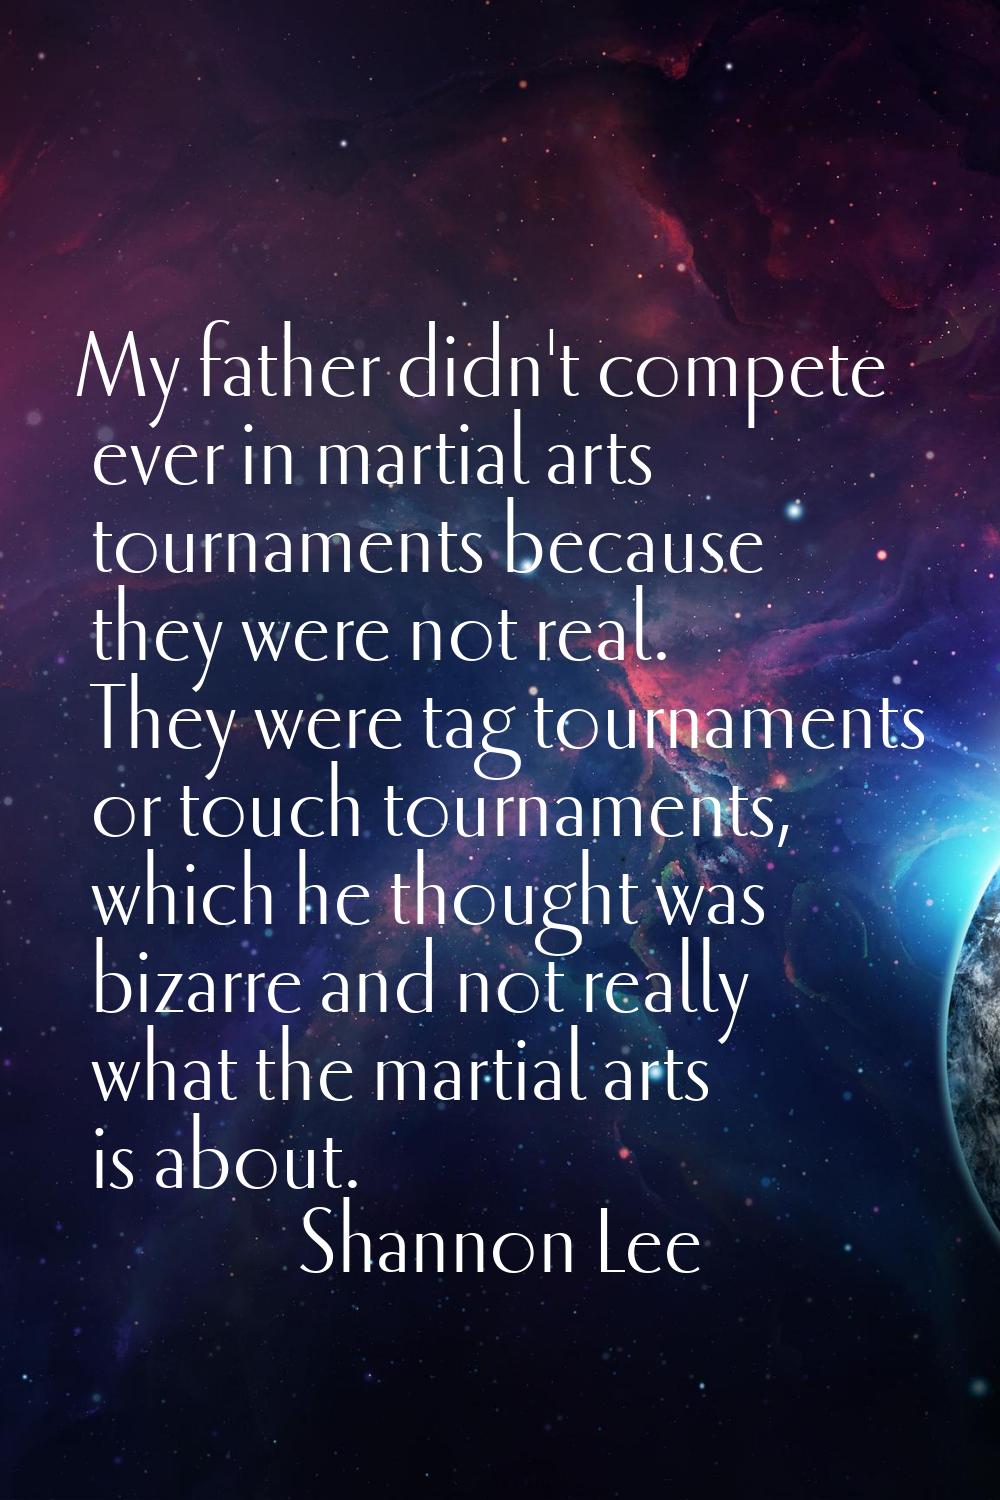 My father didn't compete ever in martial arts tournaments because they were not real. They were tag